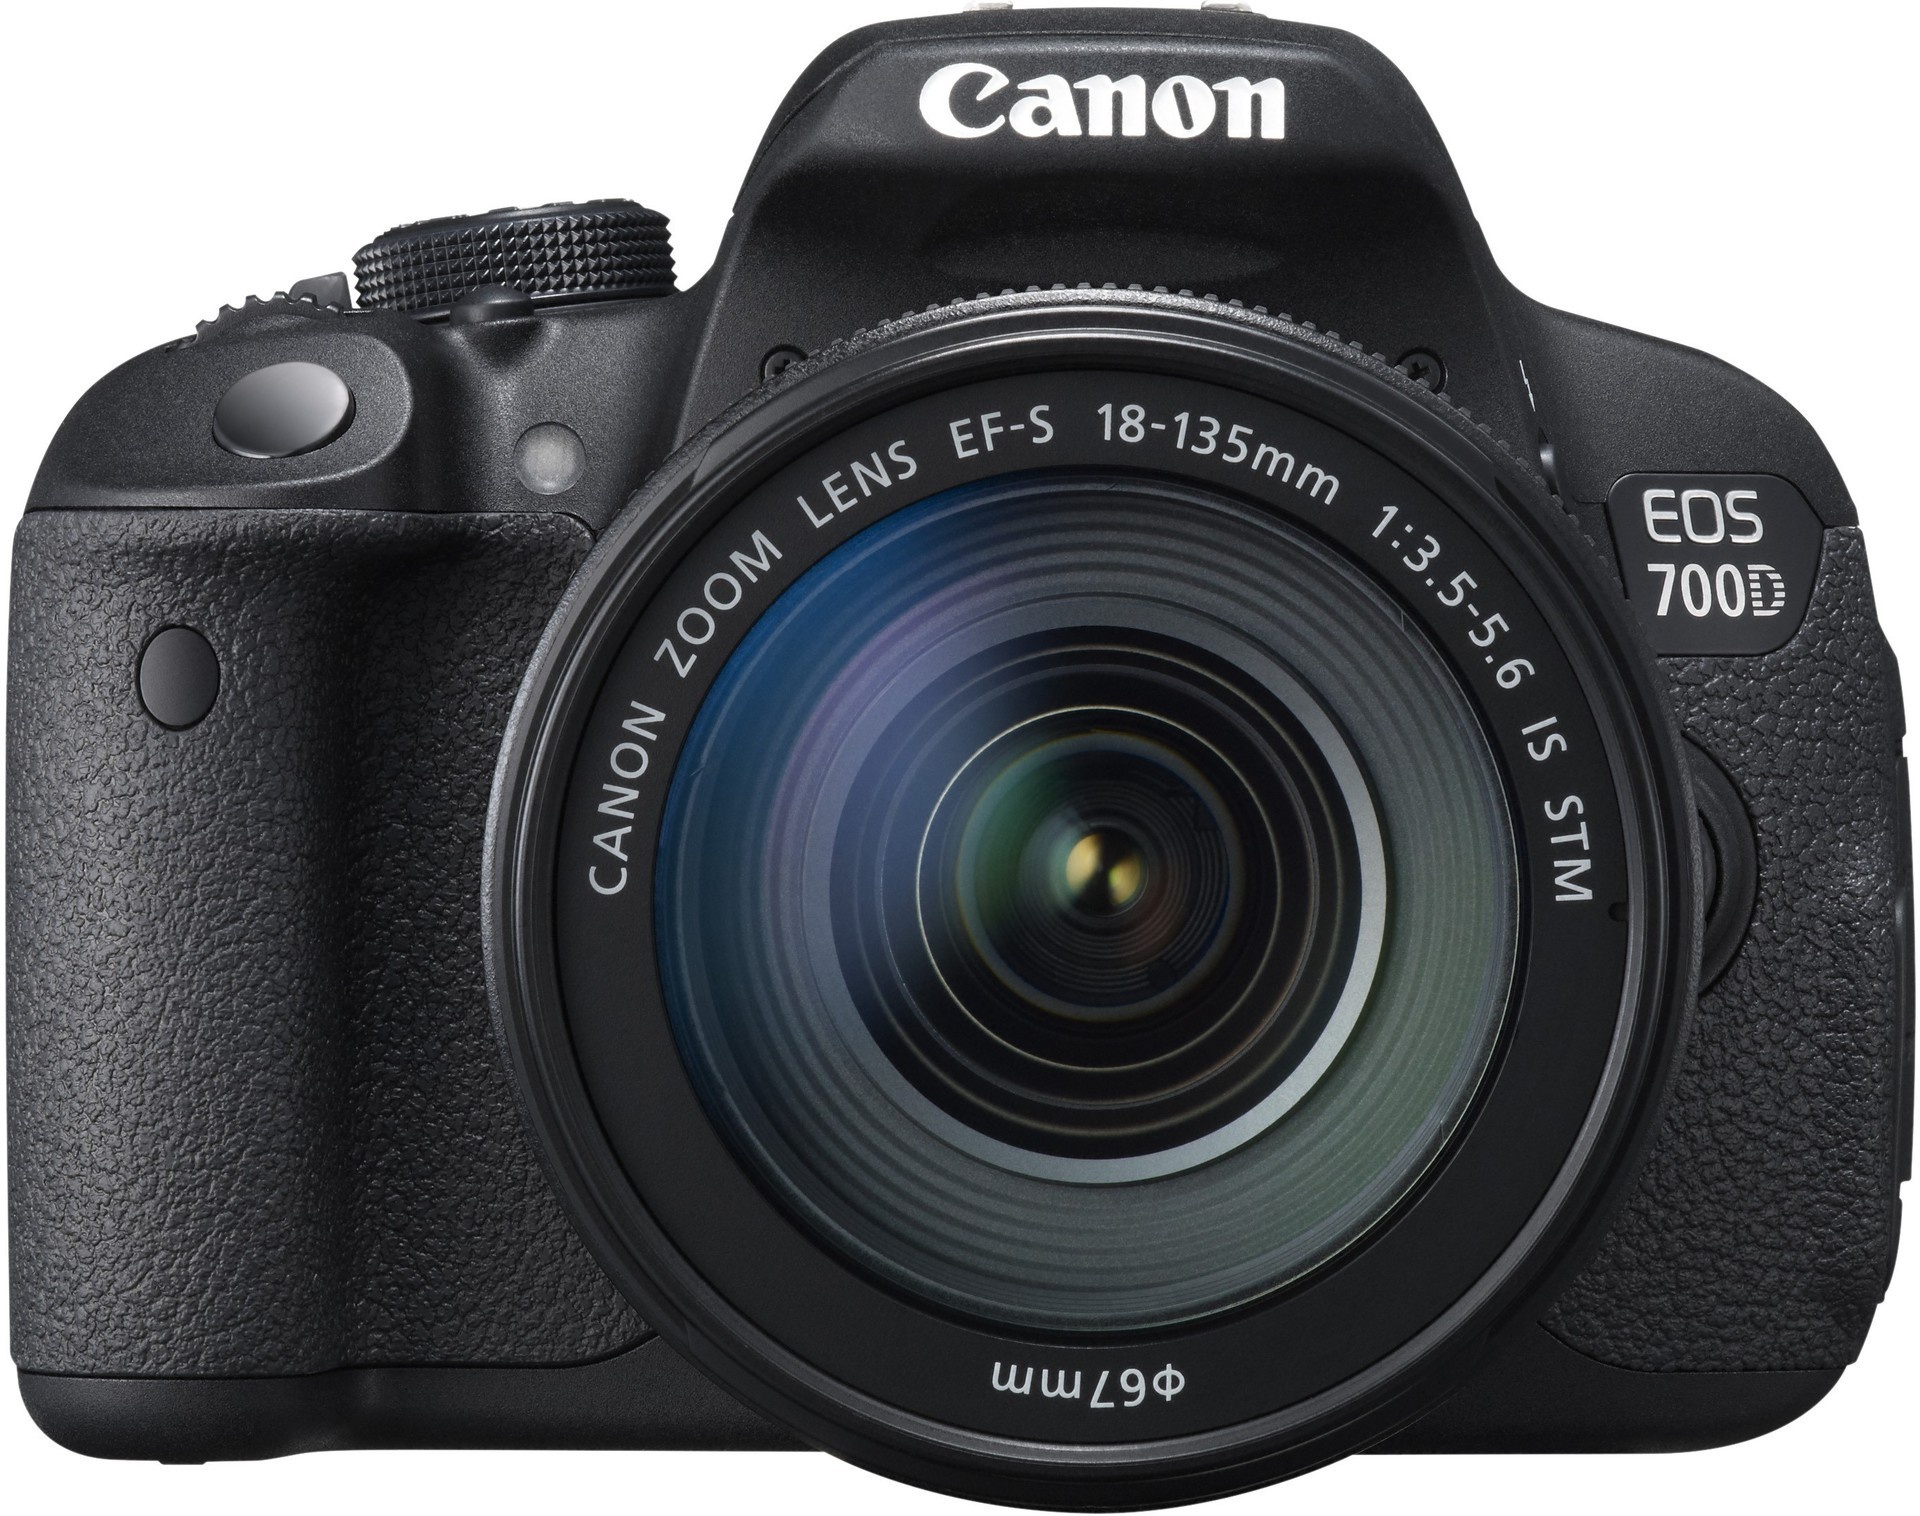 Canon EOS 700D DSLR Camera with 18-135mm Lens